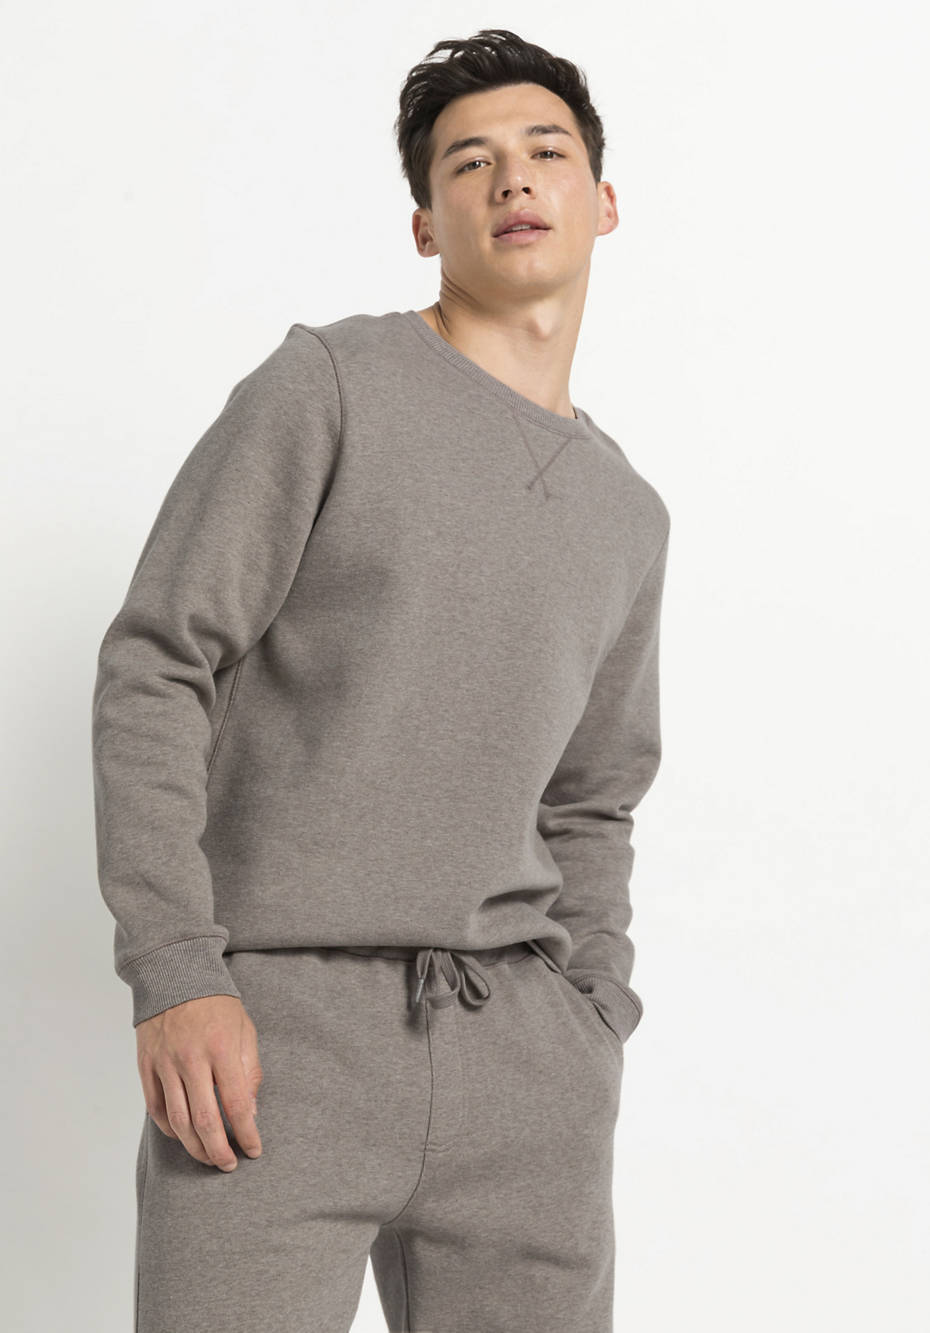 Sweater made from pure organic cotton